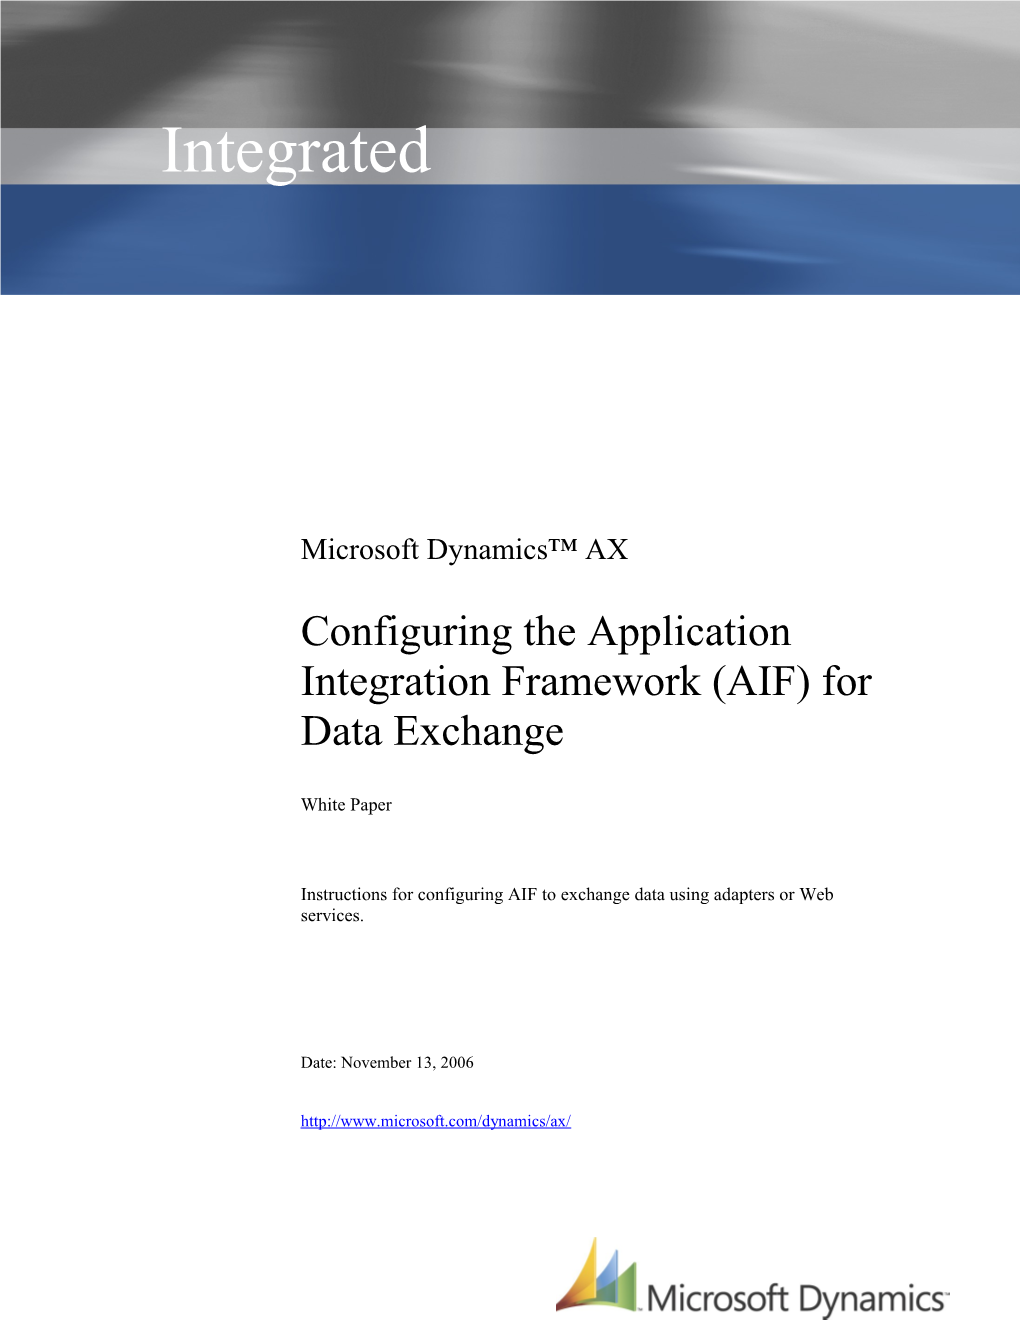 Configuring the Application Integration Framework (AIF) for Data Exchange